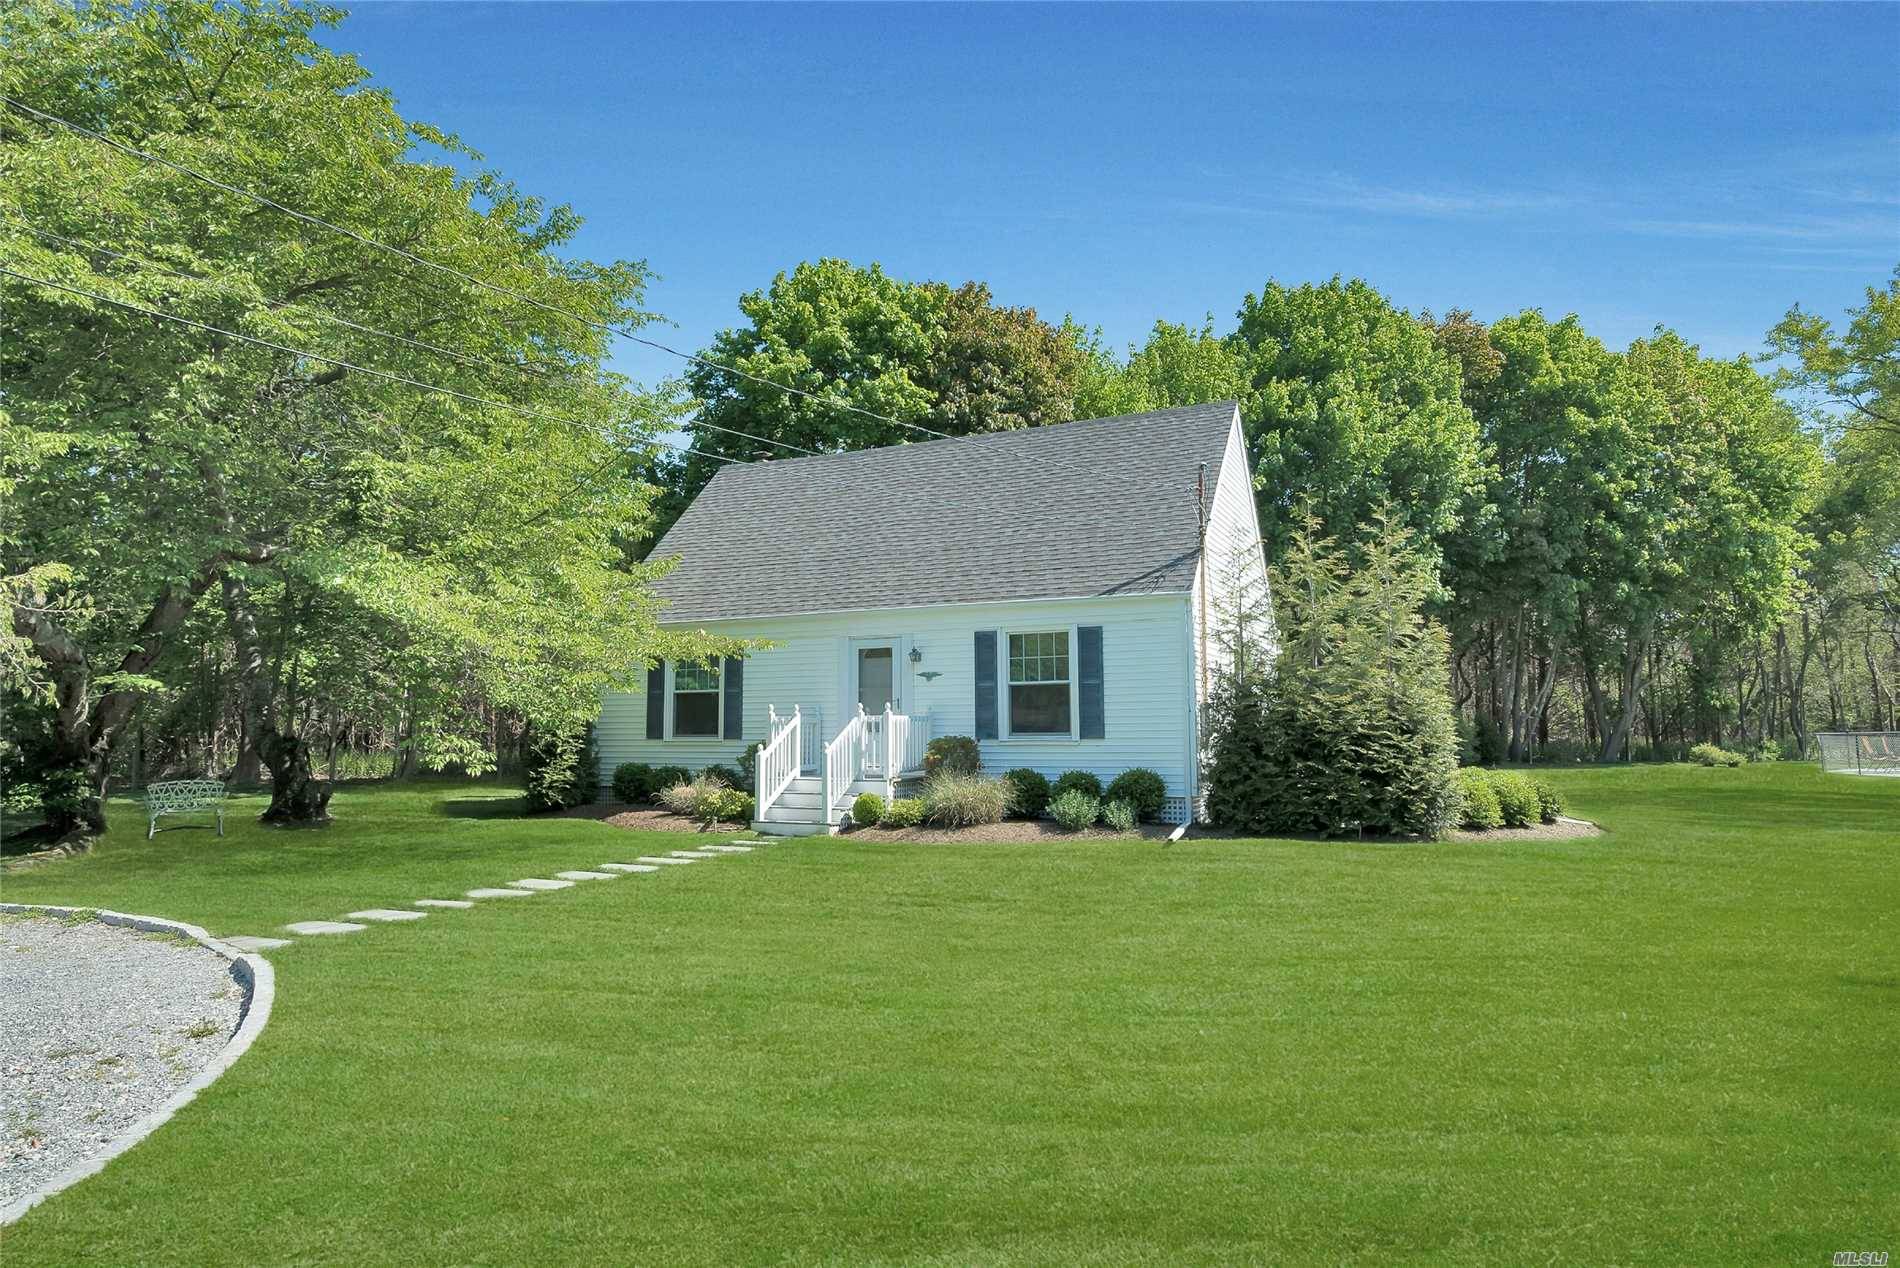 Escape To A Quaint, Three Bedroom Home Tucked Away In Westhampton, Just 3Miles From The Village Of Westhampton Beach.